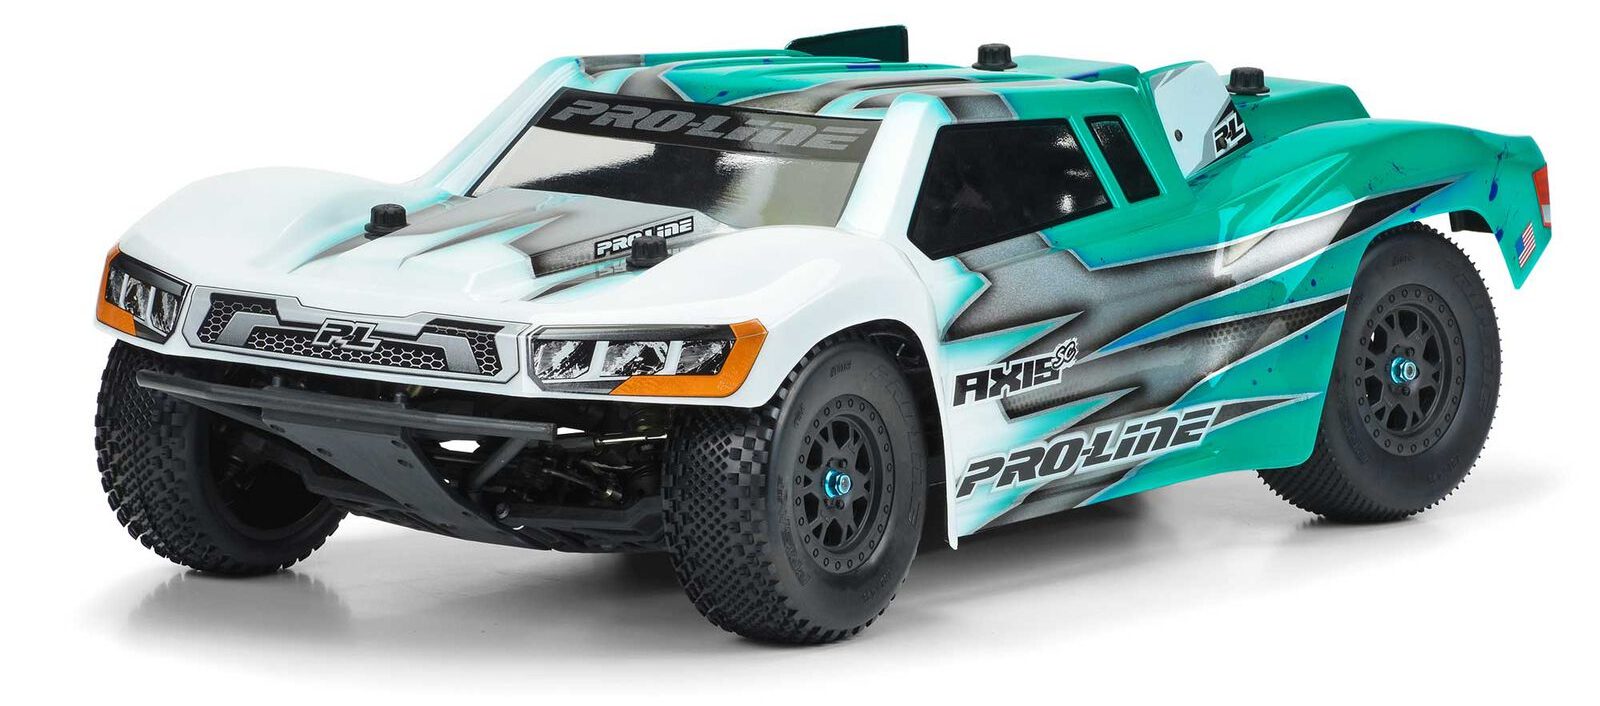 Our Top 5 Pro-Line Body Picks